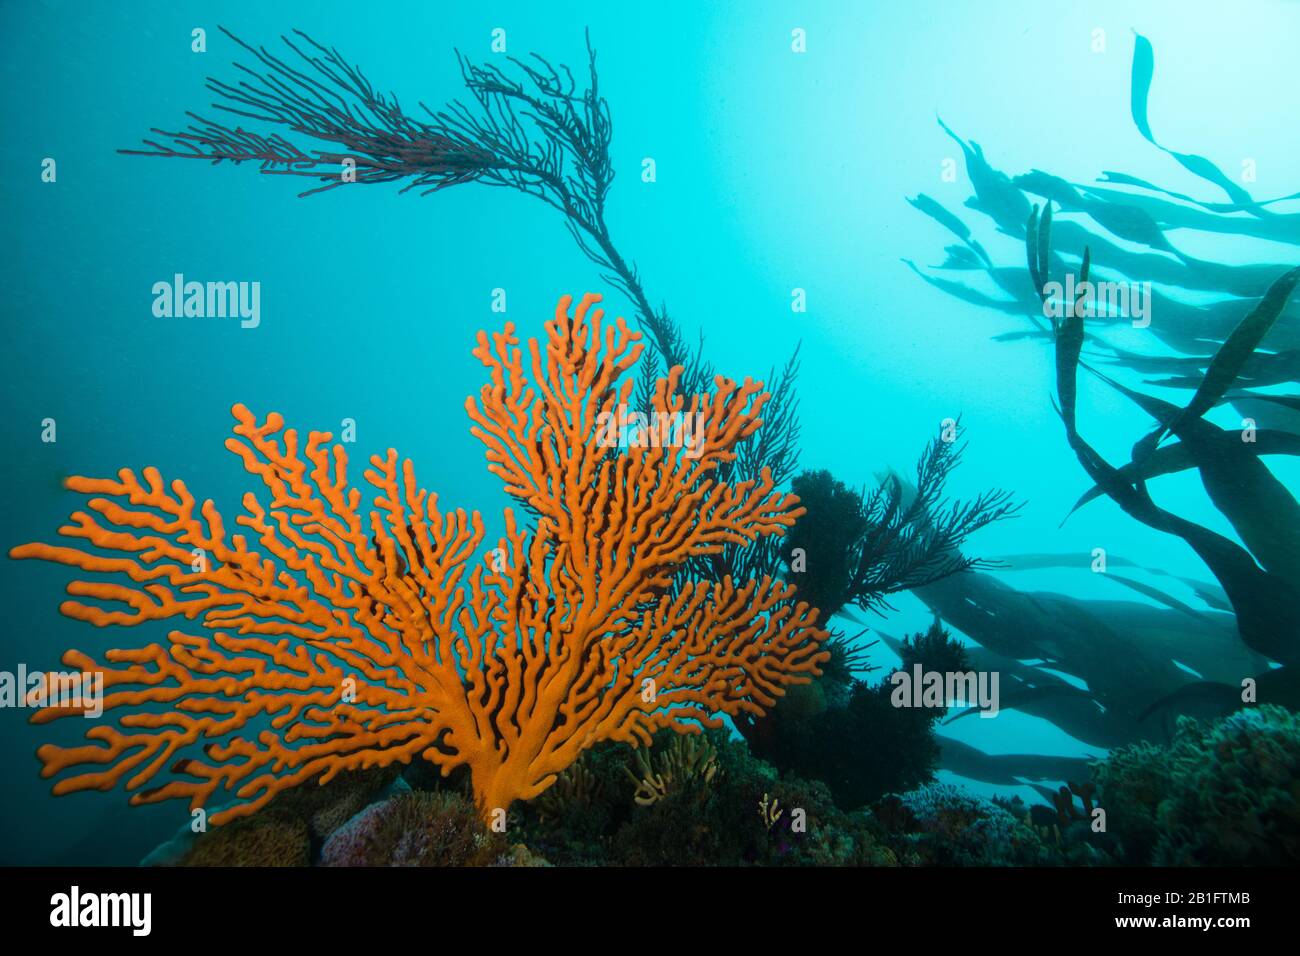 Large orange Sinuous sea fan (Eunicella tricoronata) growing on the reef with turquoise water, sunlight and kelp in the background. Stock Photo